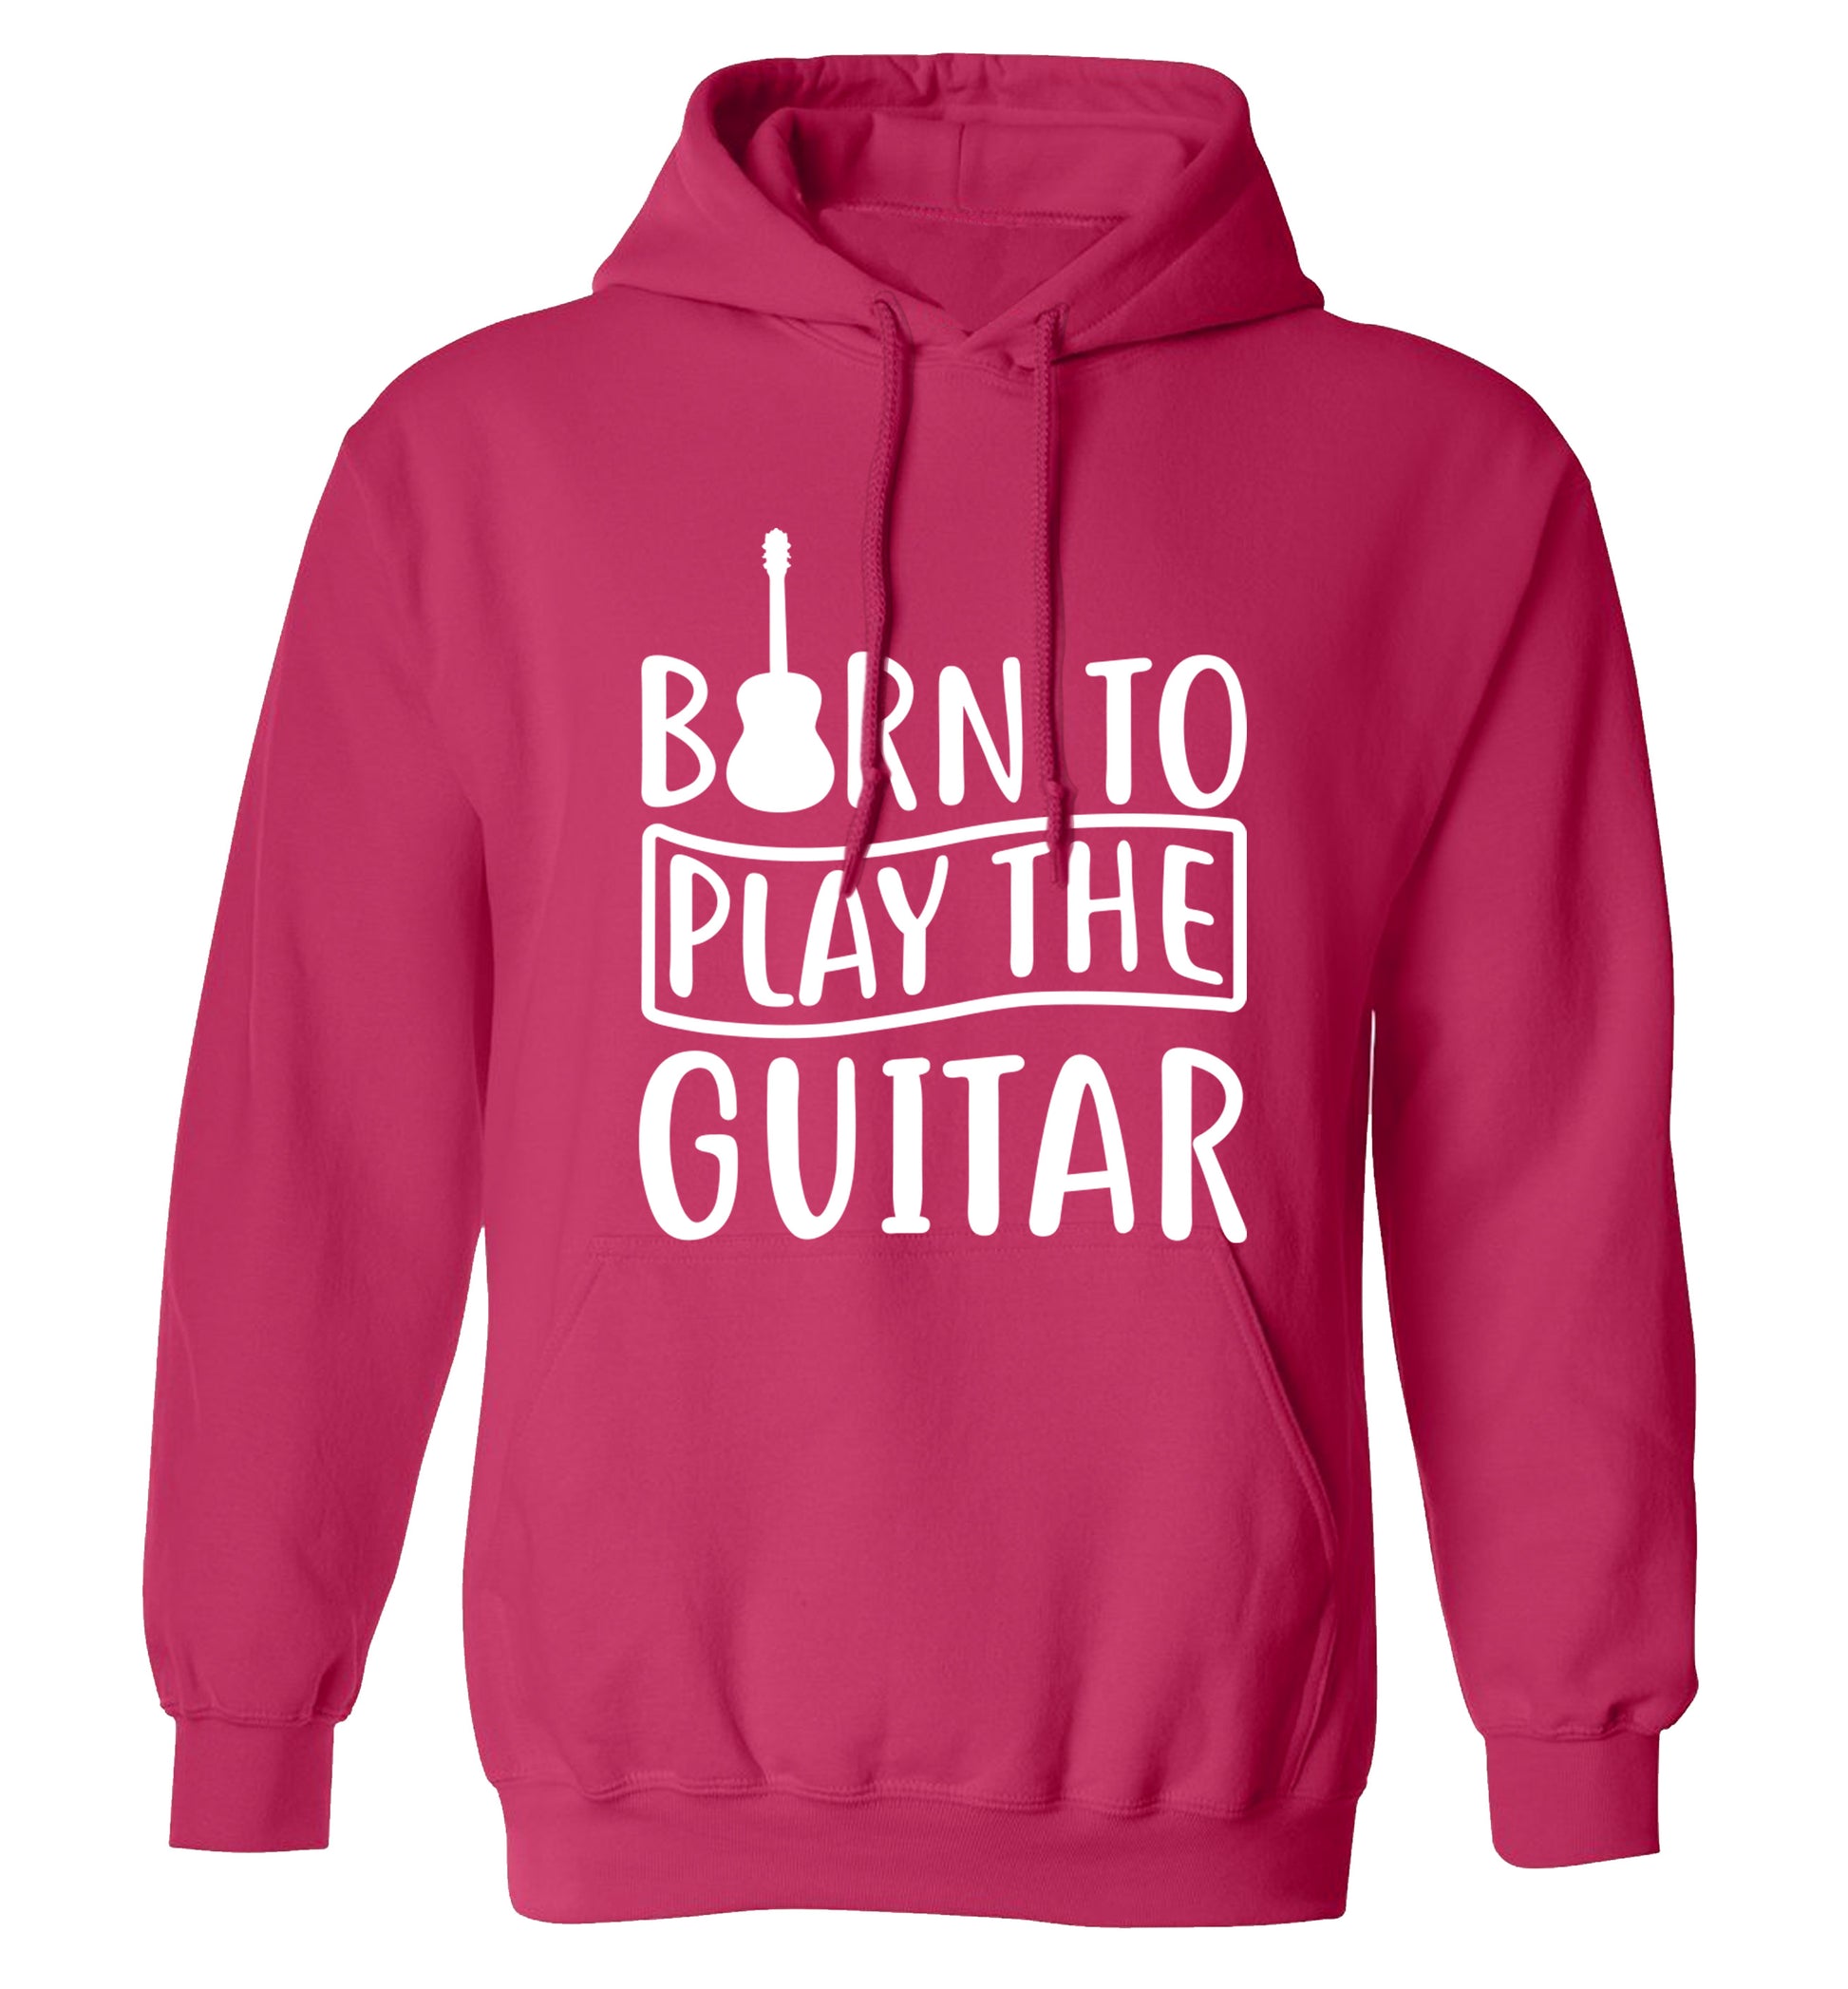 Born to play the guitar adults unisex pink hoodie 2XL